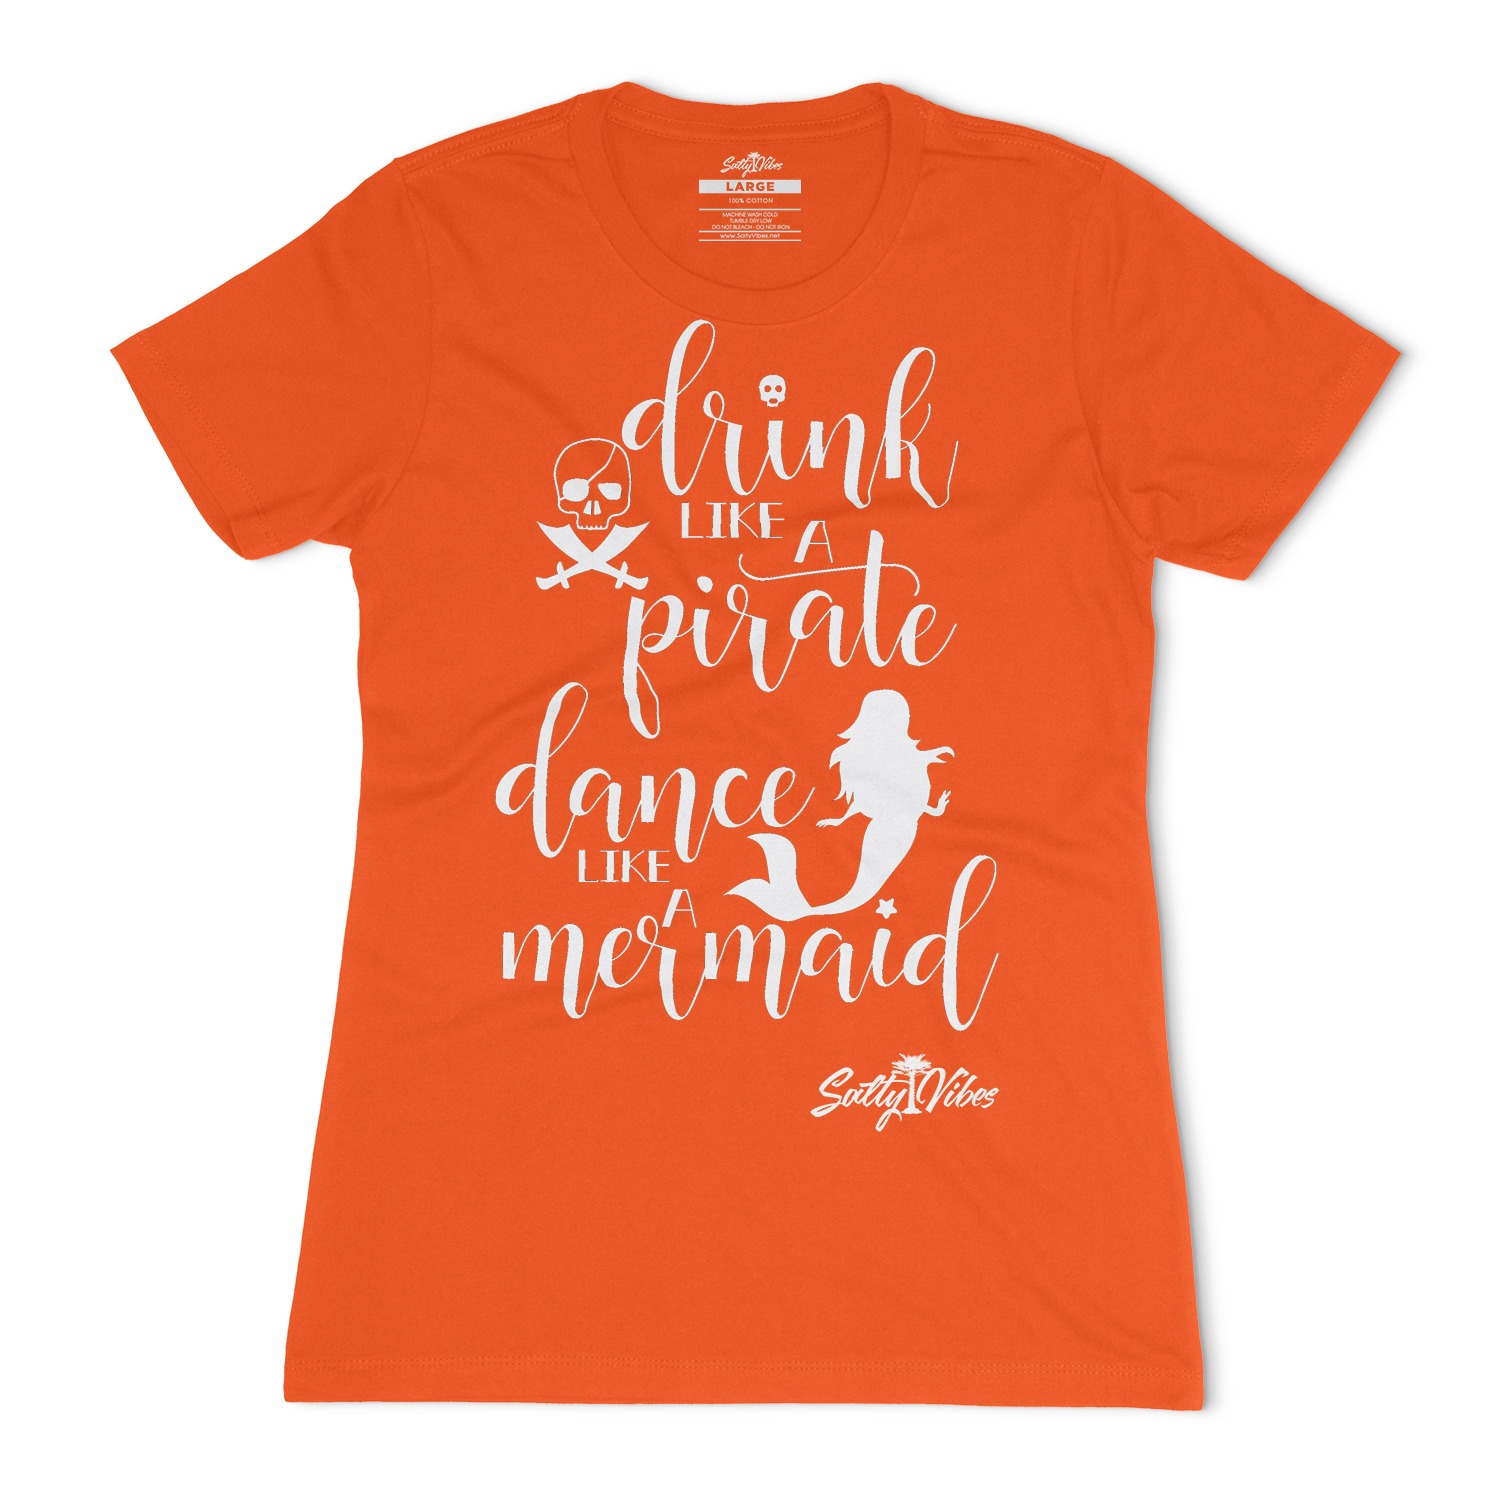 Salty Vibes Mermaid Sailor Women's Fitted T-Shirt - Orange, 2XL